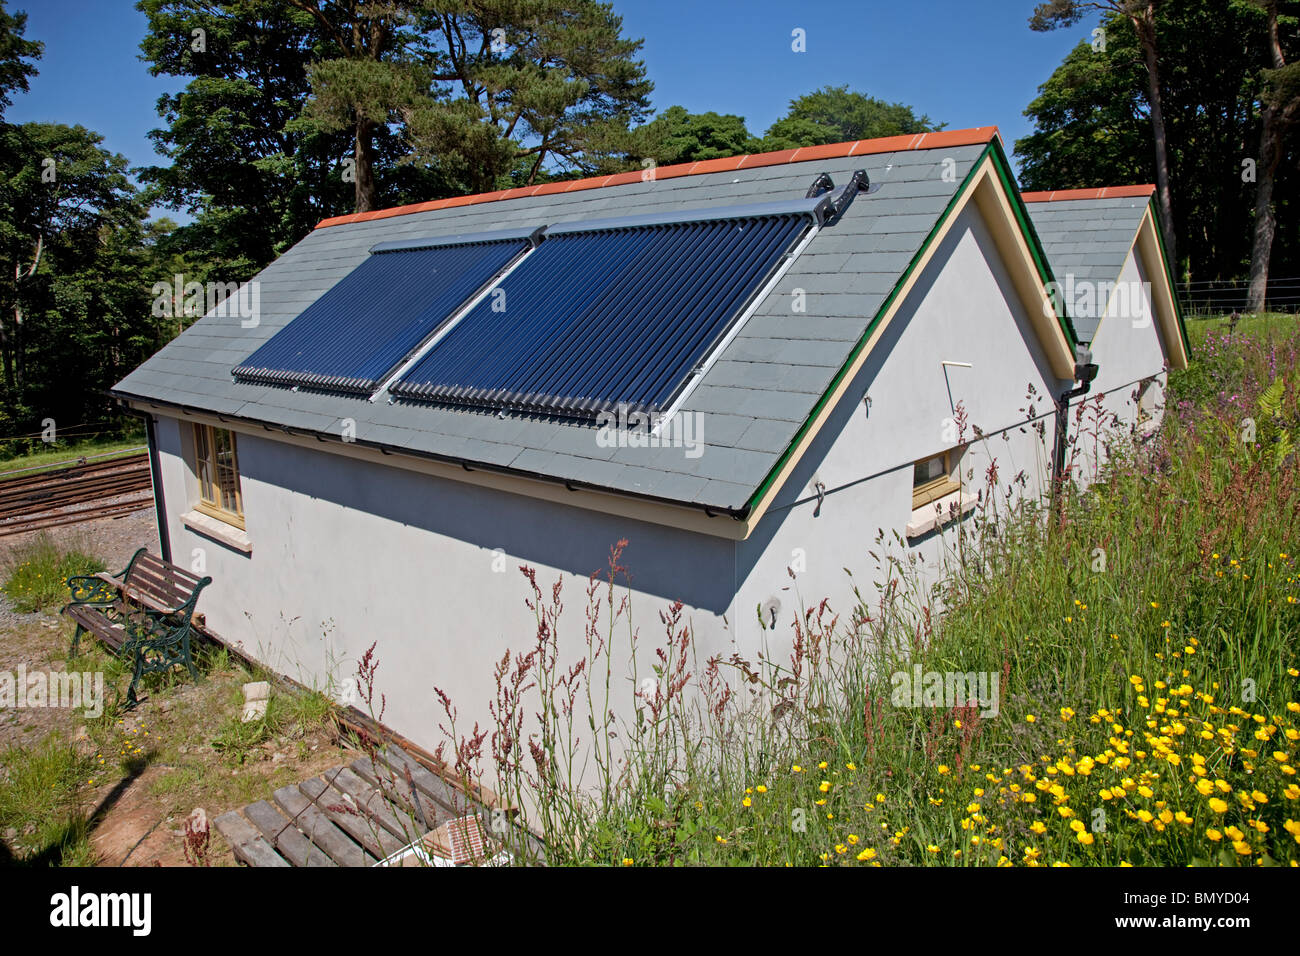 Solar thermal panels on roof of Woody Bay Station Parracombe North Devon UK Stock Photo